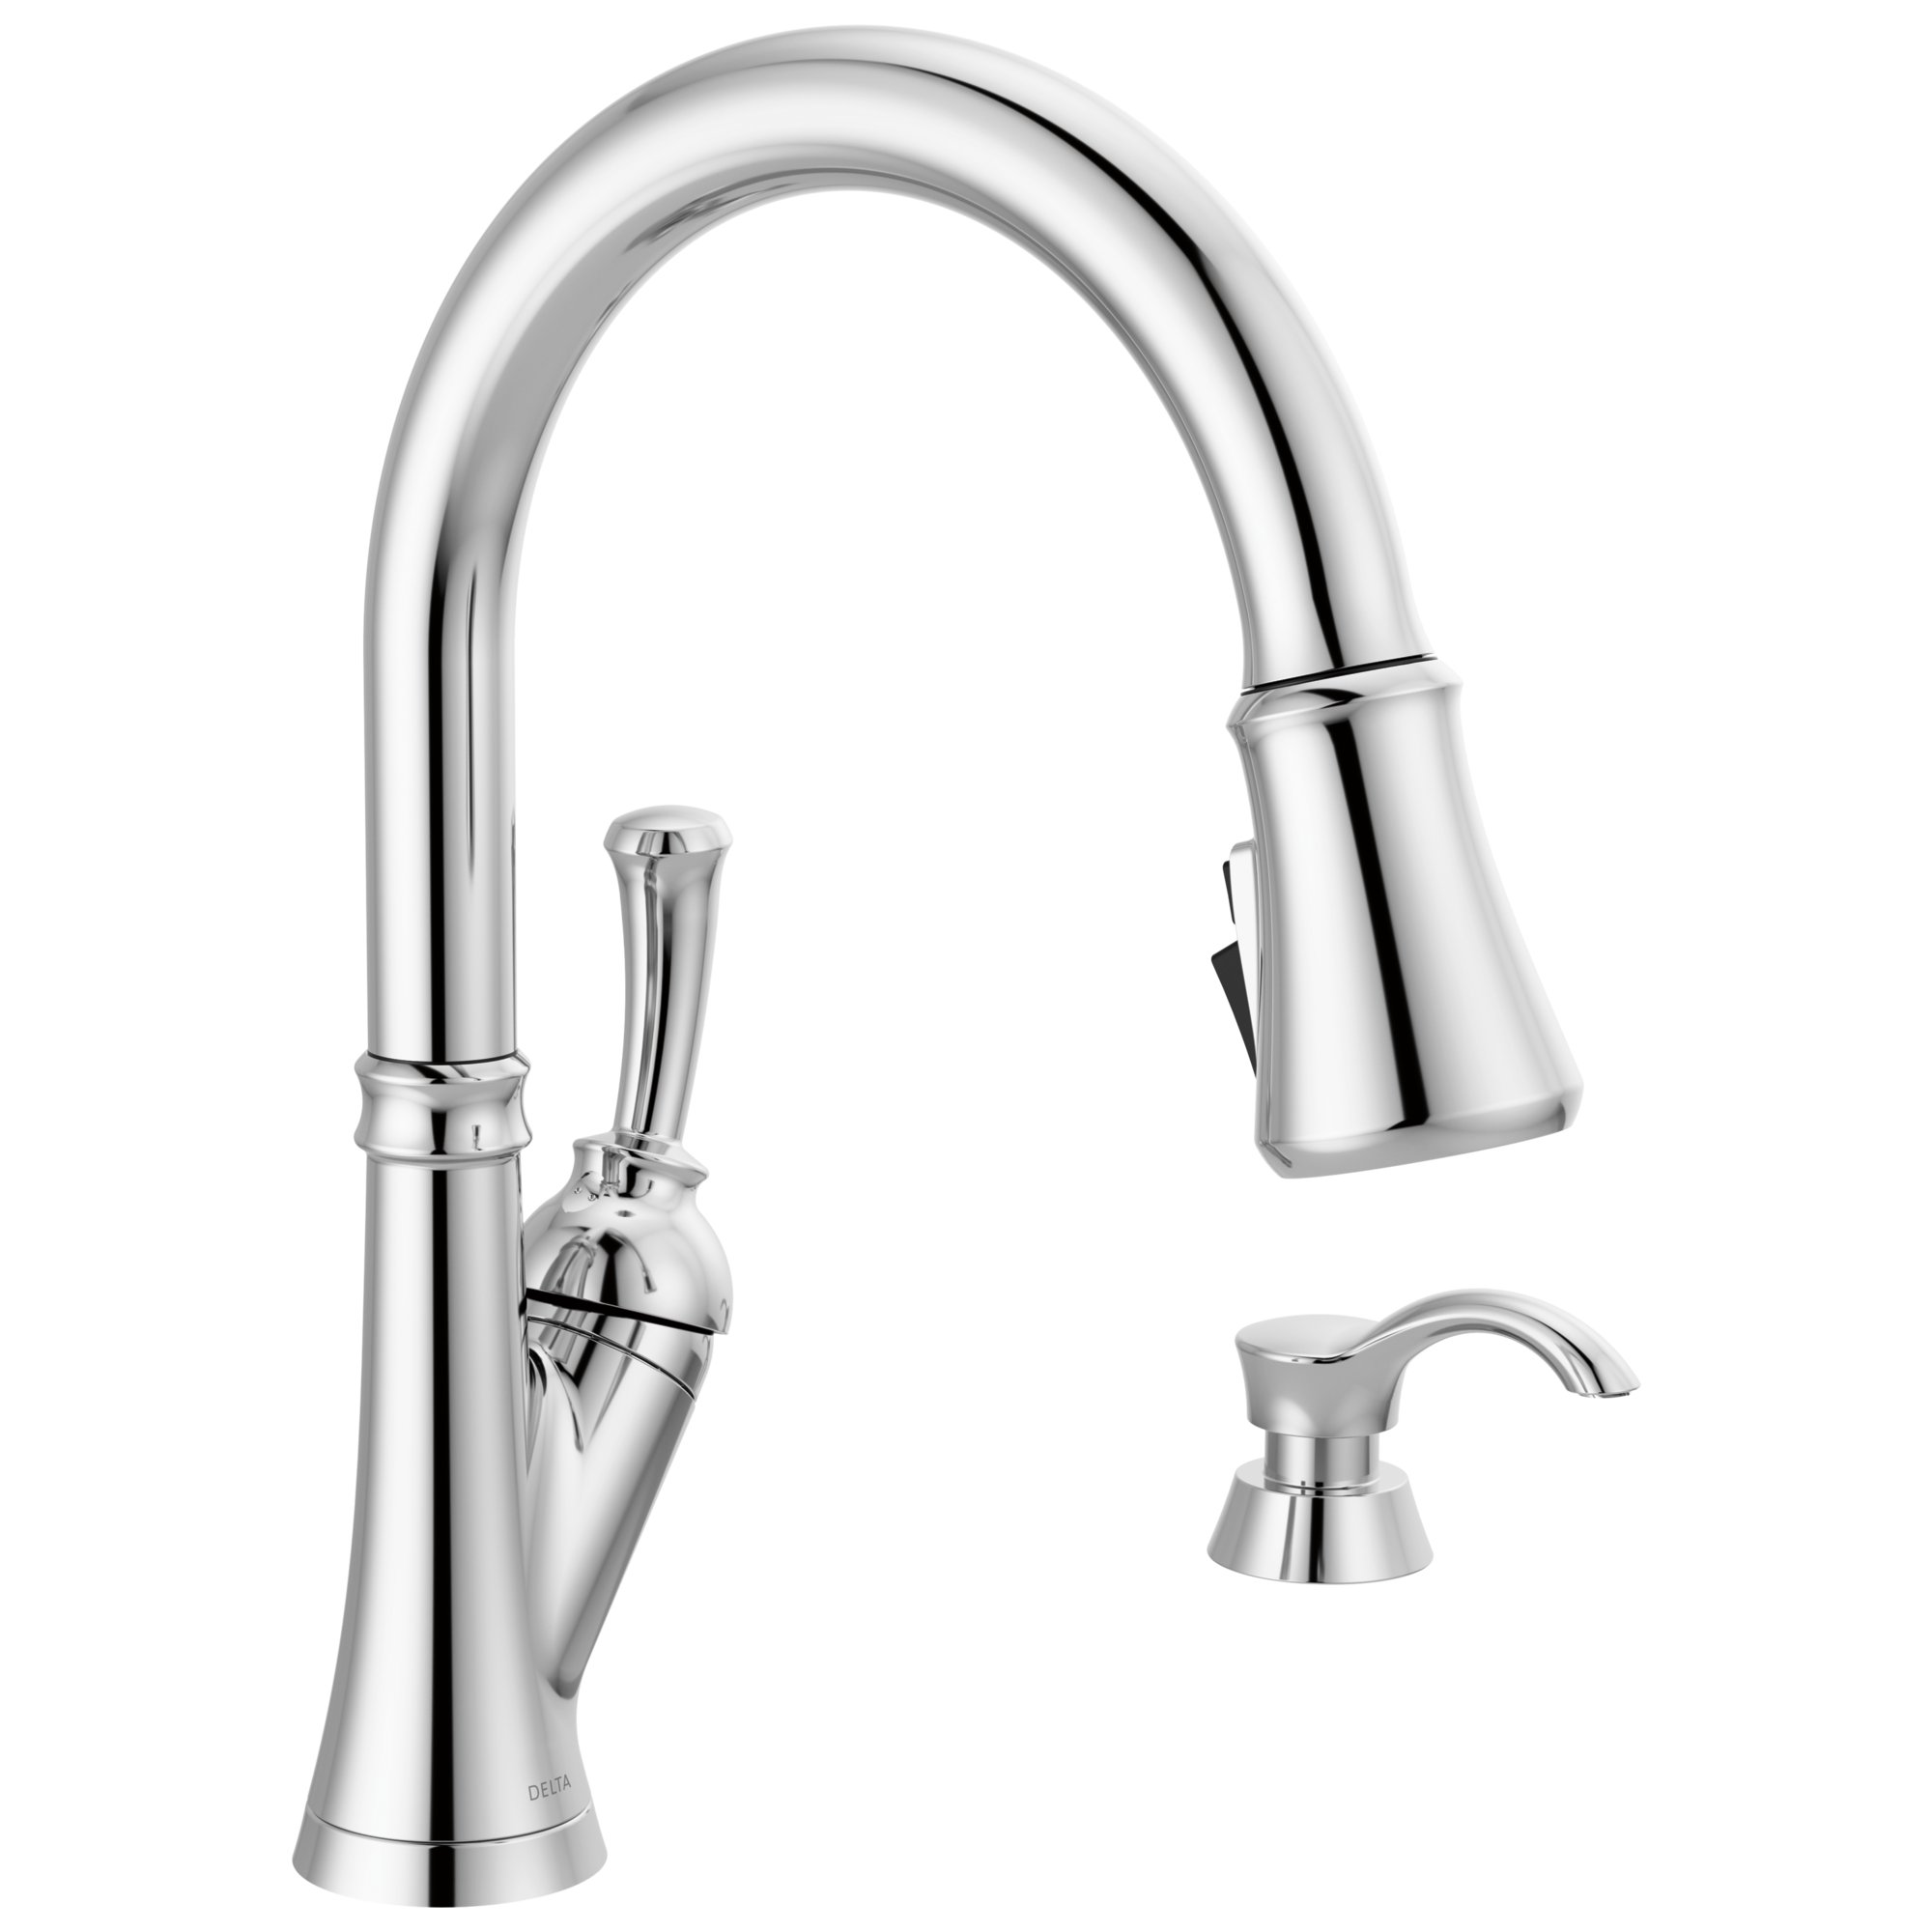 Savile Chrome Single Handle Pull-down Kitchen Faucet with Deck Plate and Soap Dispenser Included Rubber | - Delta 19949Z-SD-DST